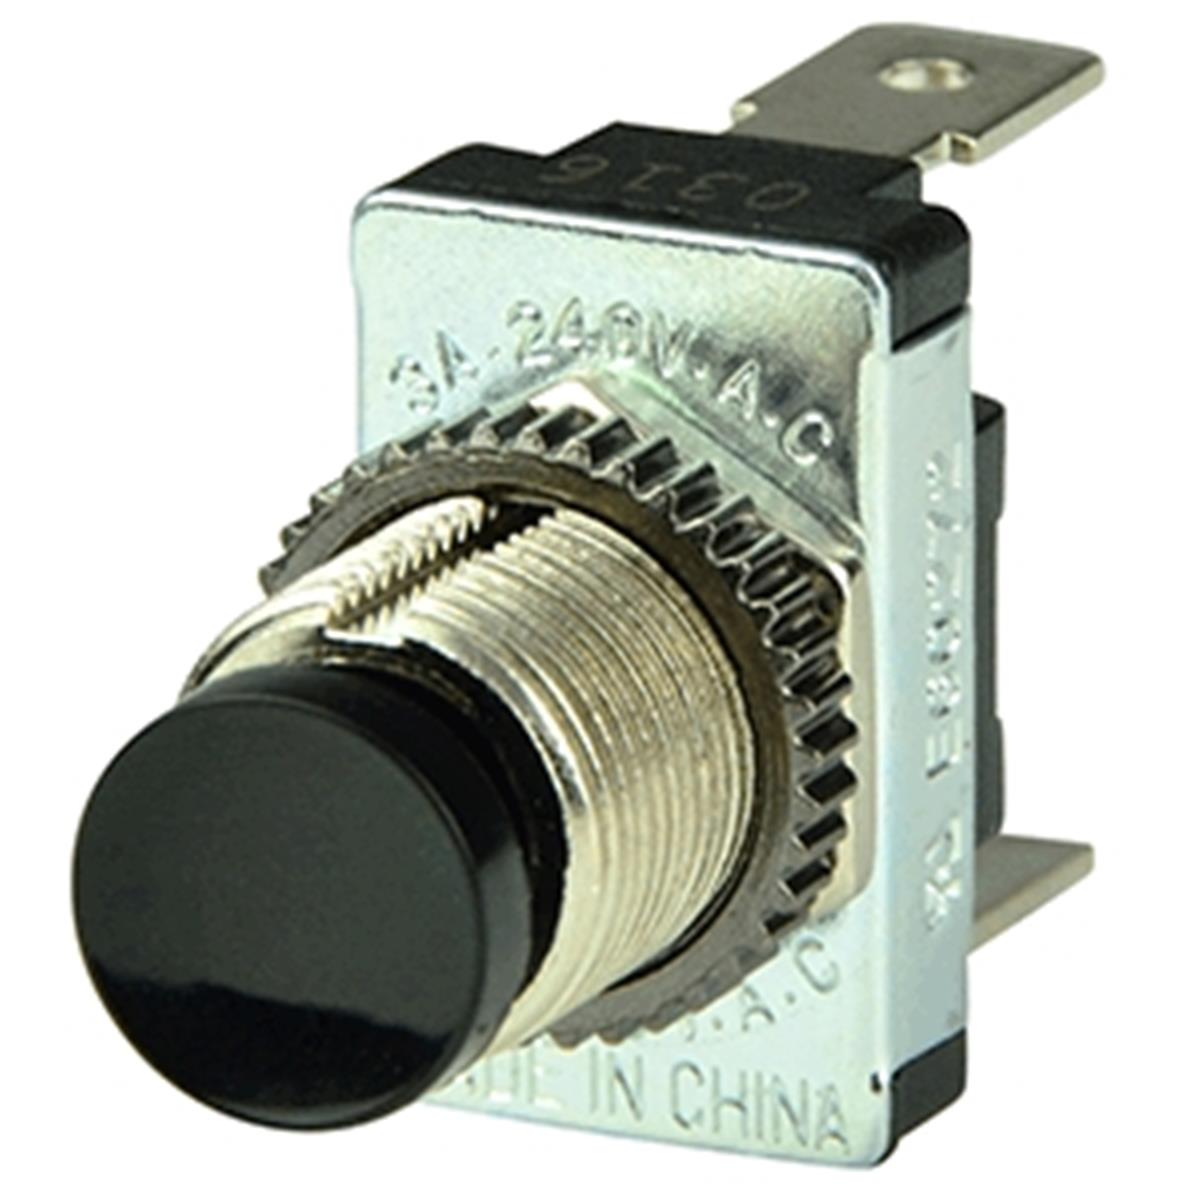 1001402 Black Spst Momentary Contact Switch - Off & On